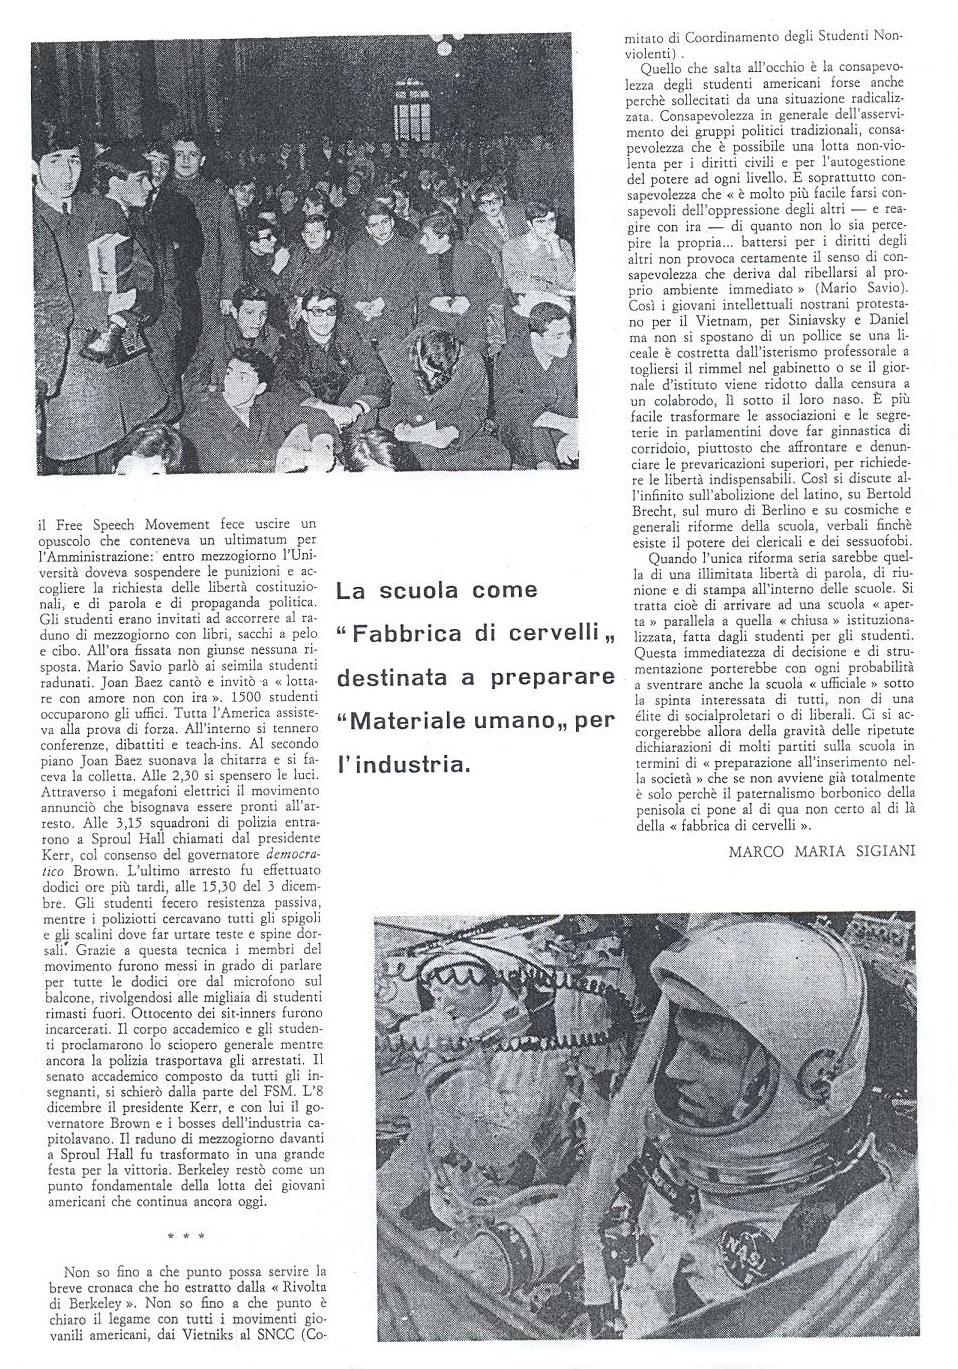 The fourth issue of Mondo Beat magazine - Edition 7,000 copies - Milan, March 15, 1967